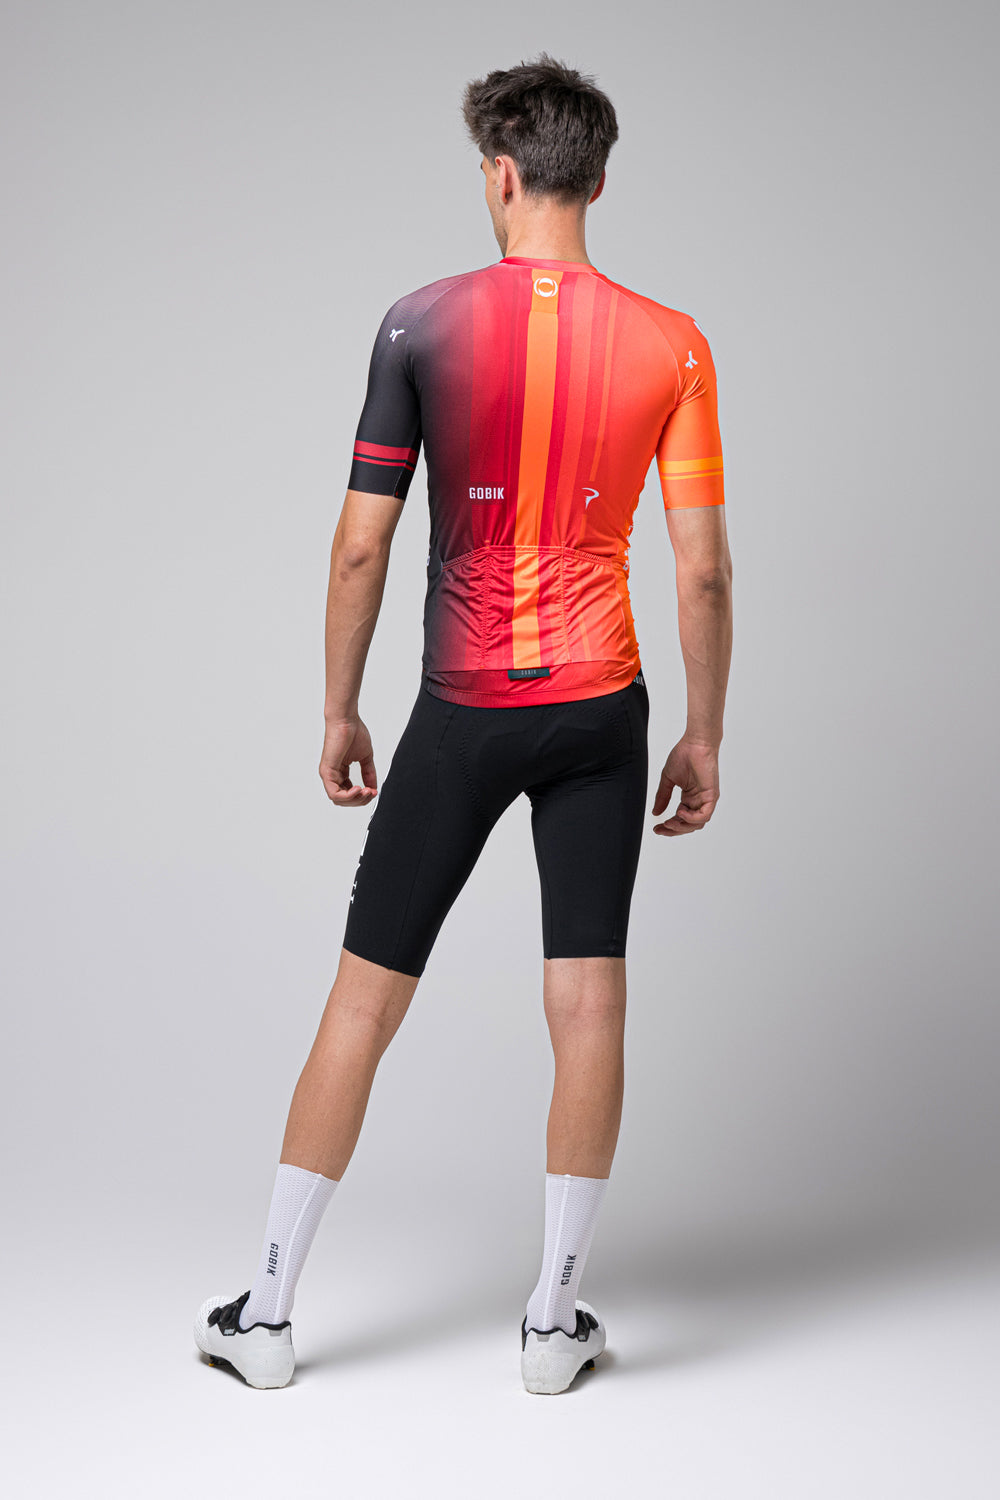 MAILLOT À MANCHES COURTES ODYSSEY UNISEX INEOS GRENADIERS 24